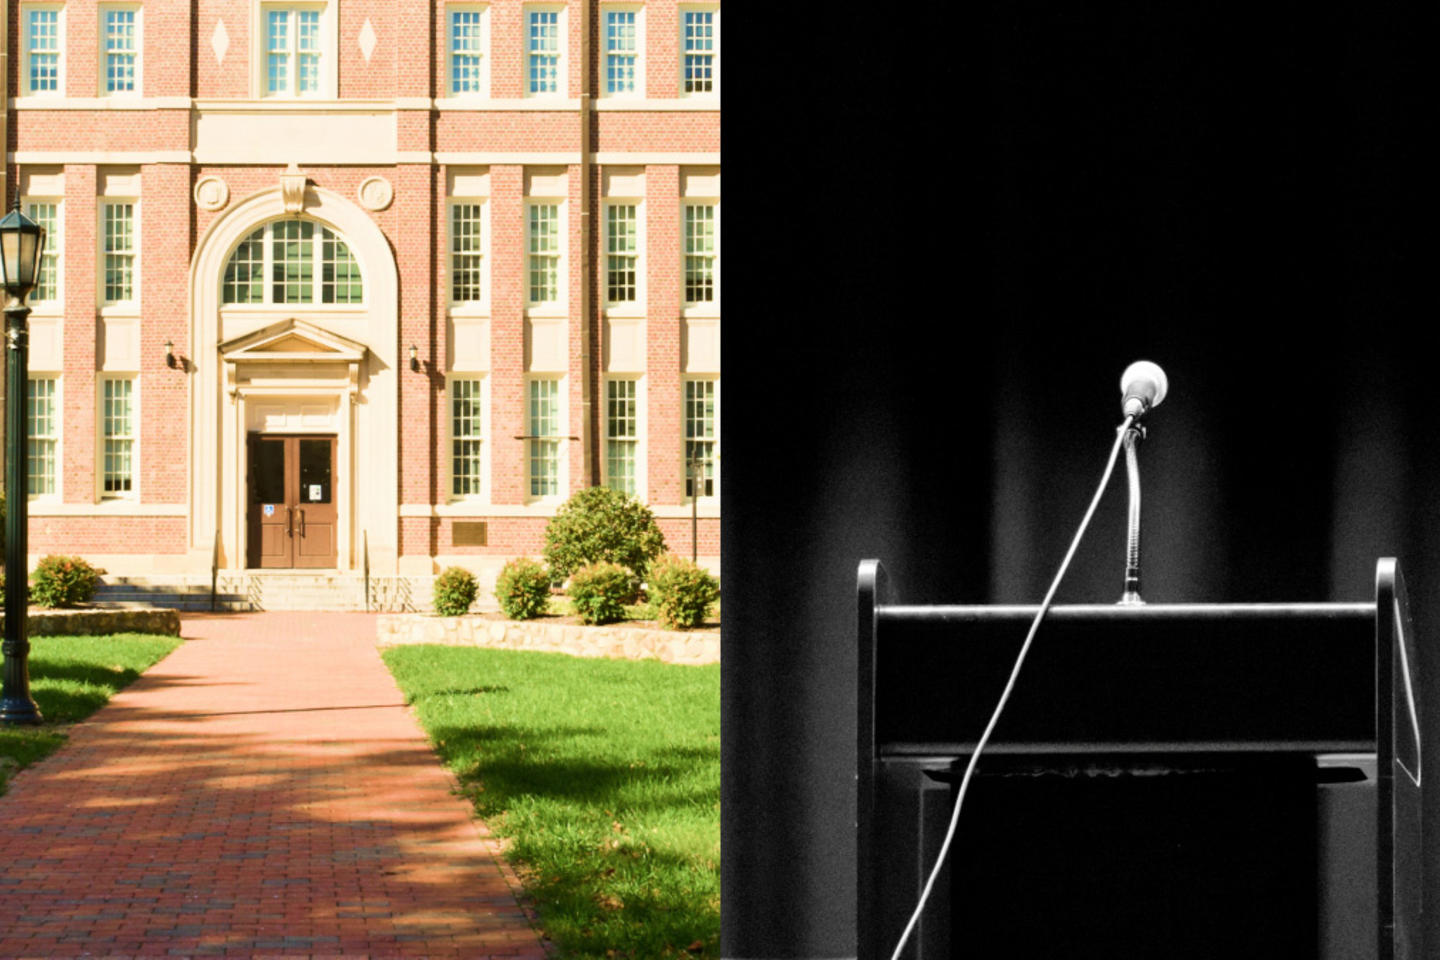 The left image shows the front of a brick building, while the right shows a lectern with a microphone